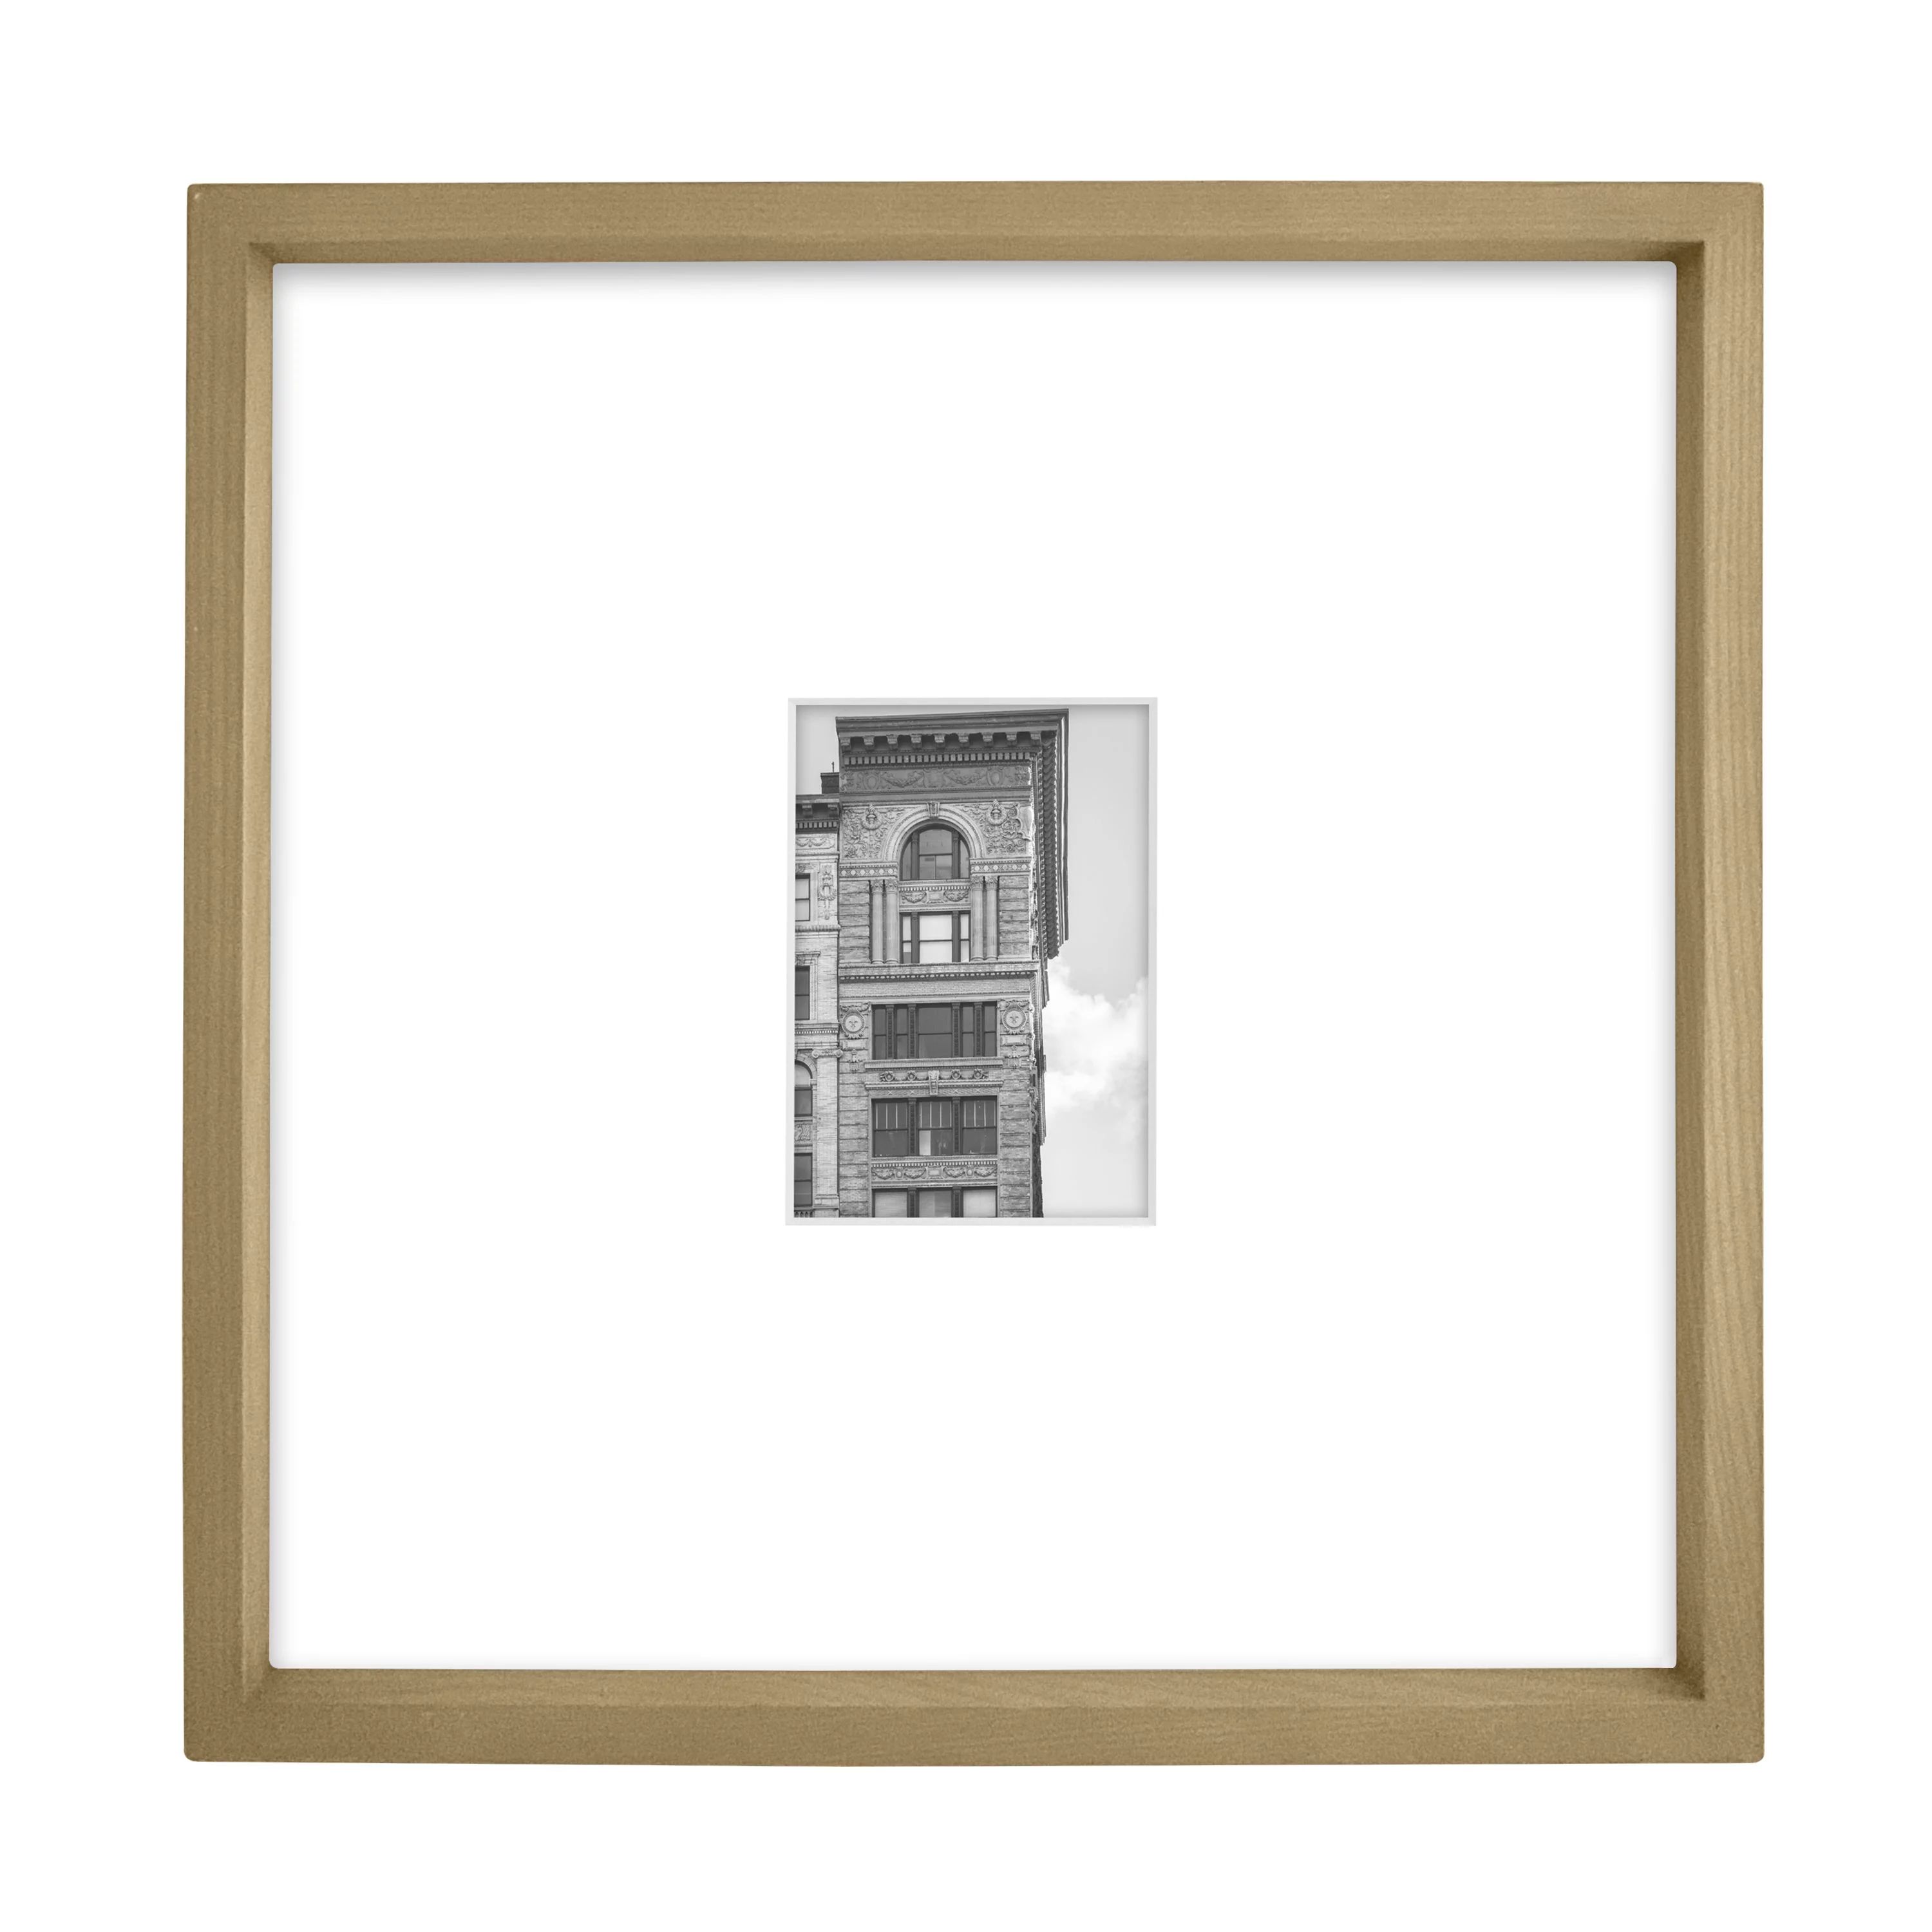 Better Homes & Gardens 18" x 18" matted to 5" x 7" Wood Wall Picture Frame, Brown | Walmart (US)